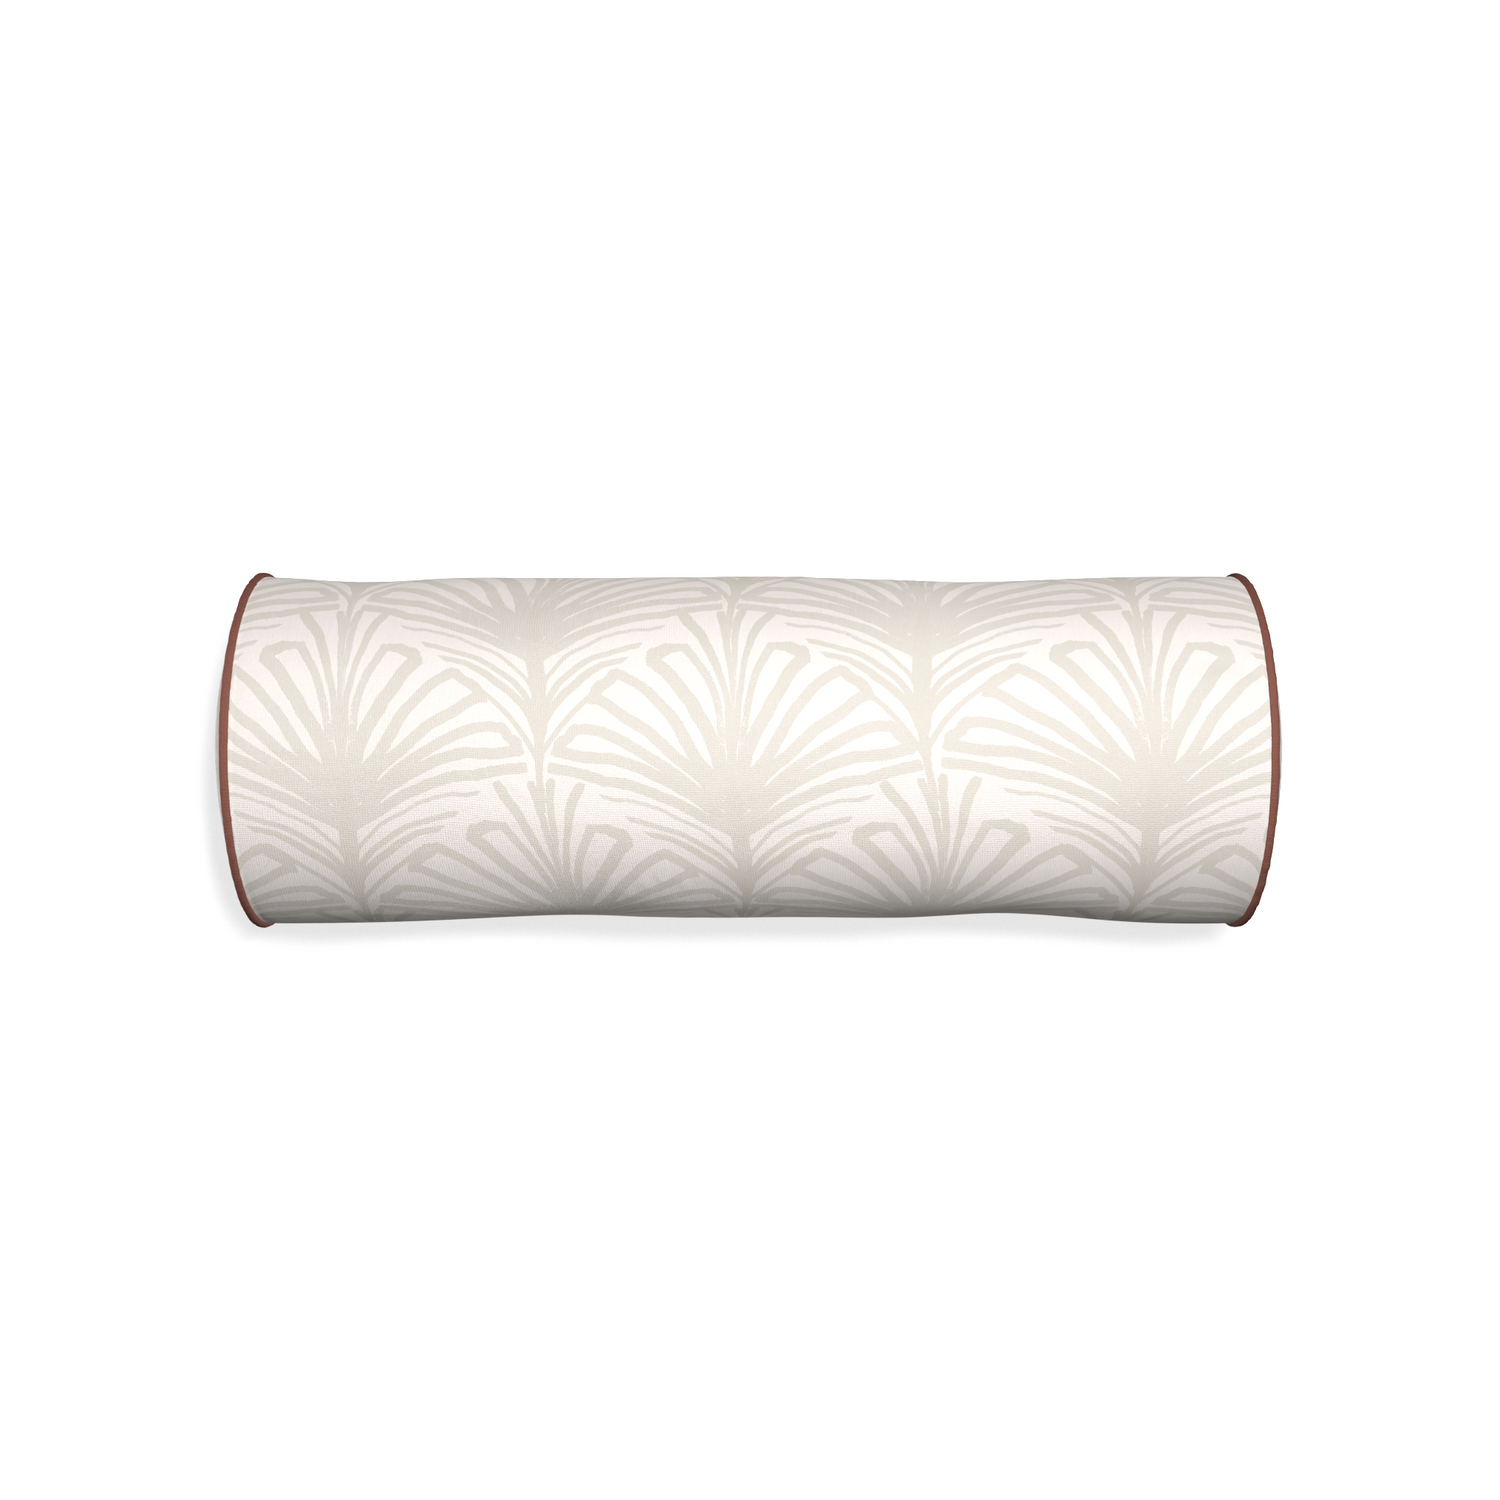 Bolster suzy sand custom beige palmpillow with w piping on white background